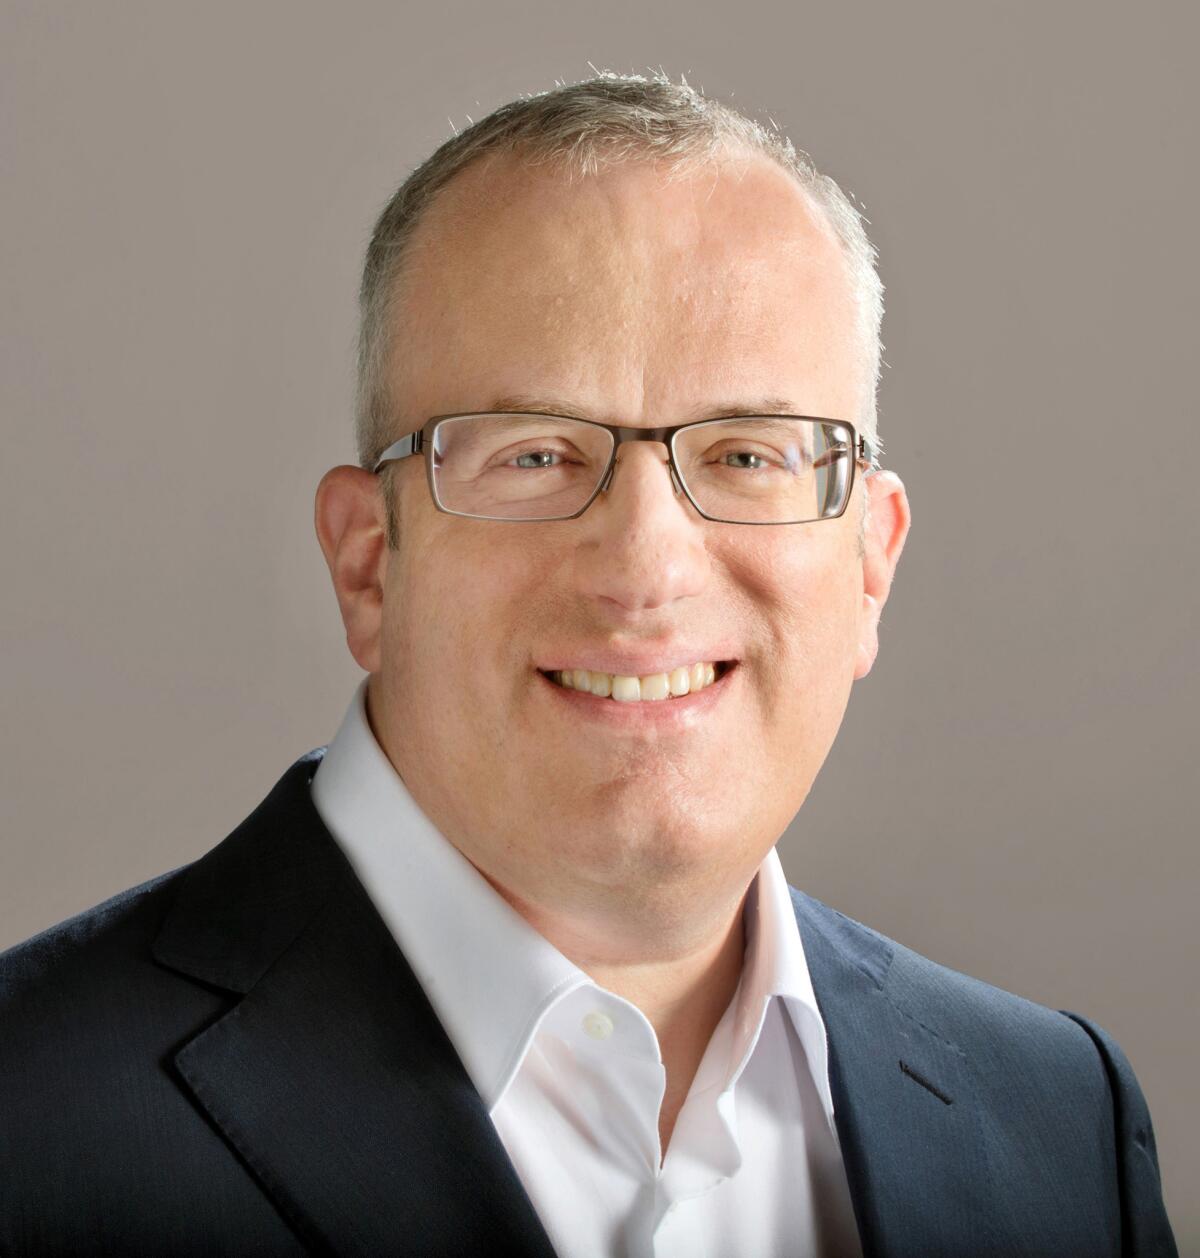 Brendan Eich has stepped down as CEO of Mozilla following protests over his support of Proposition 8 in California.